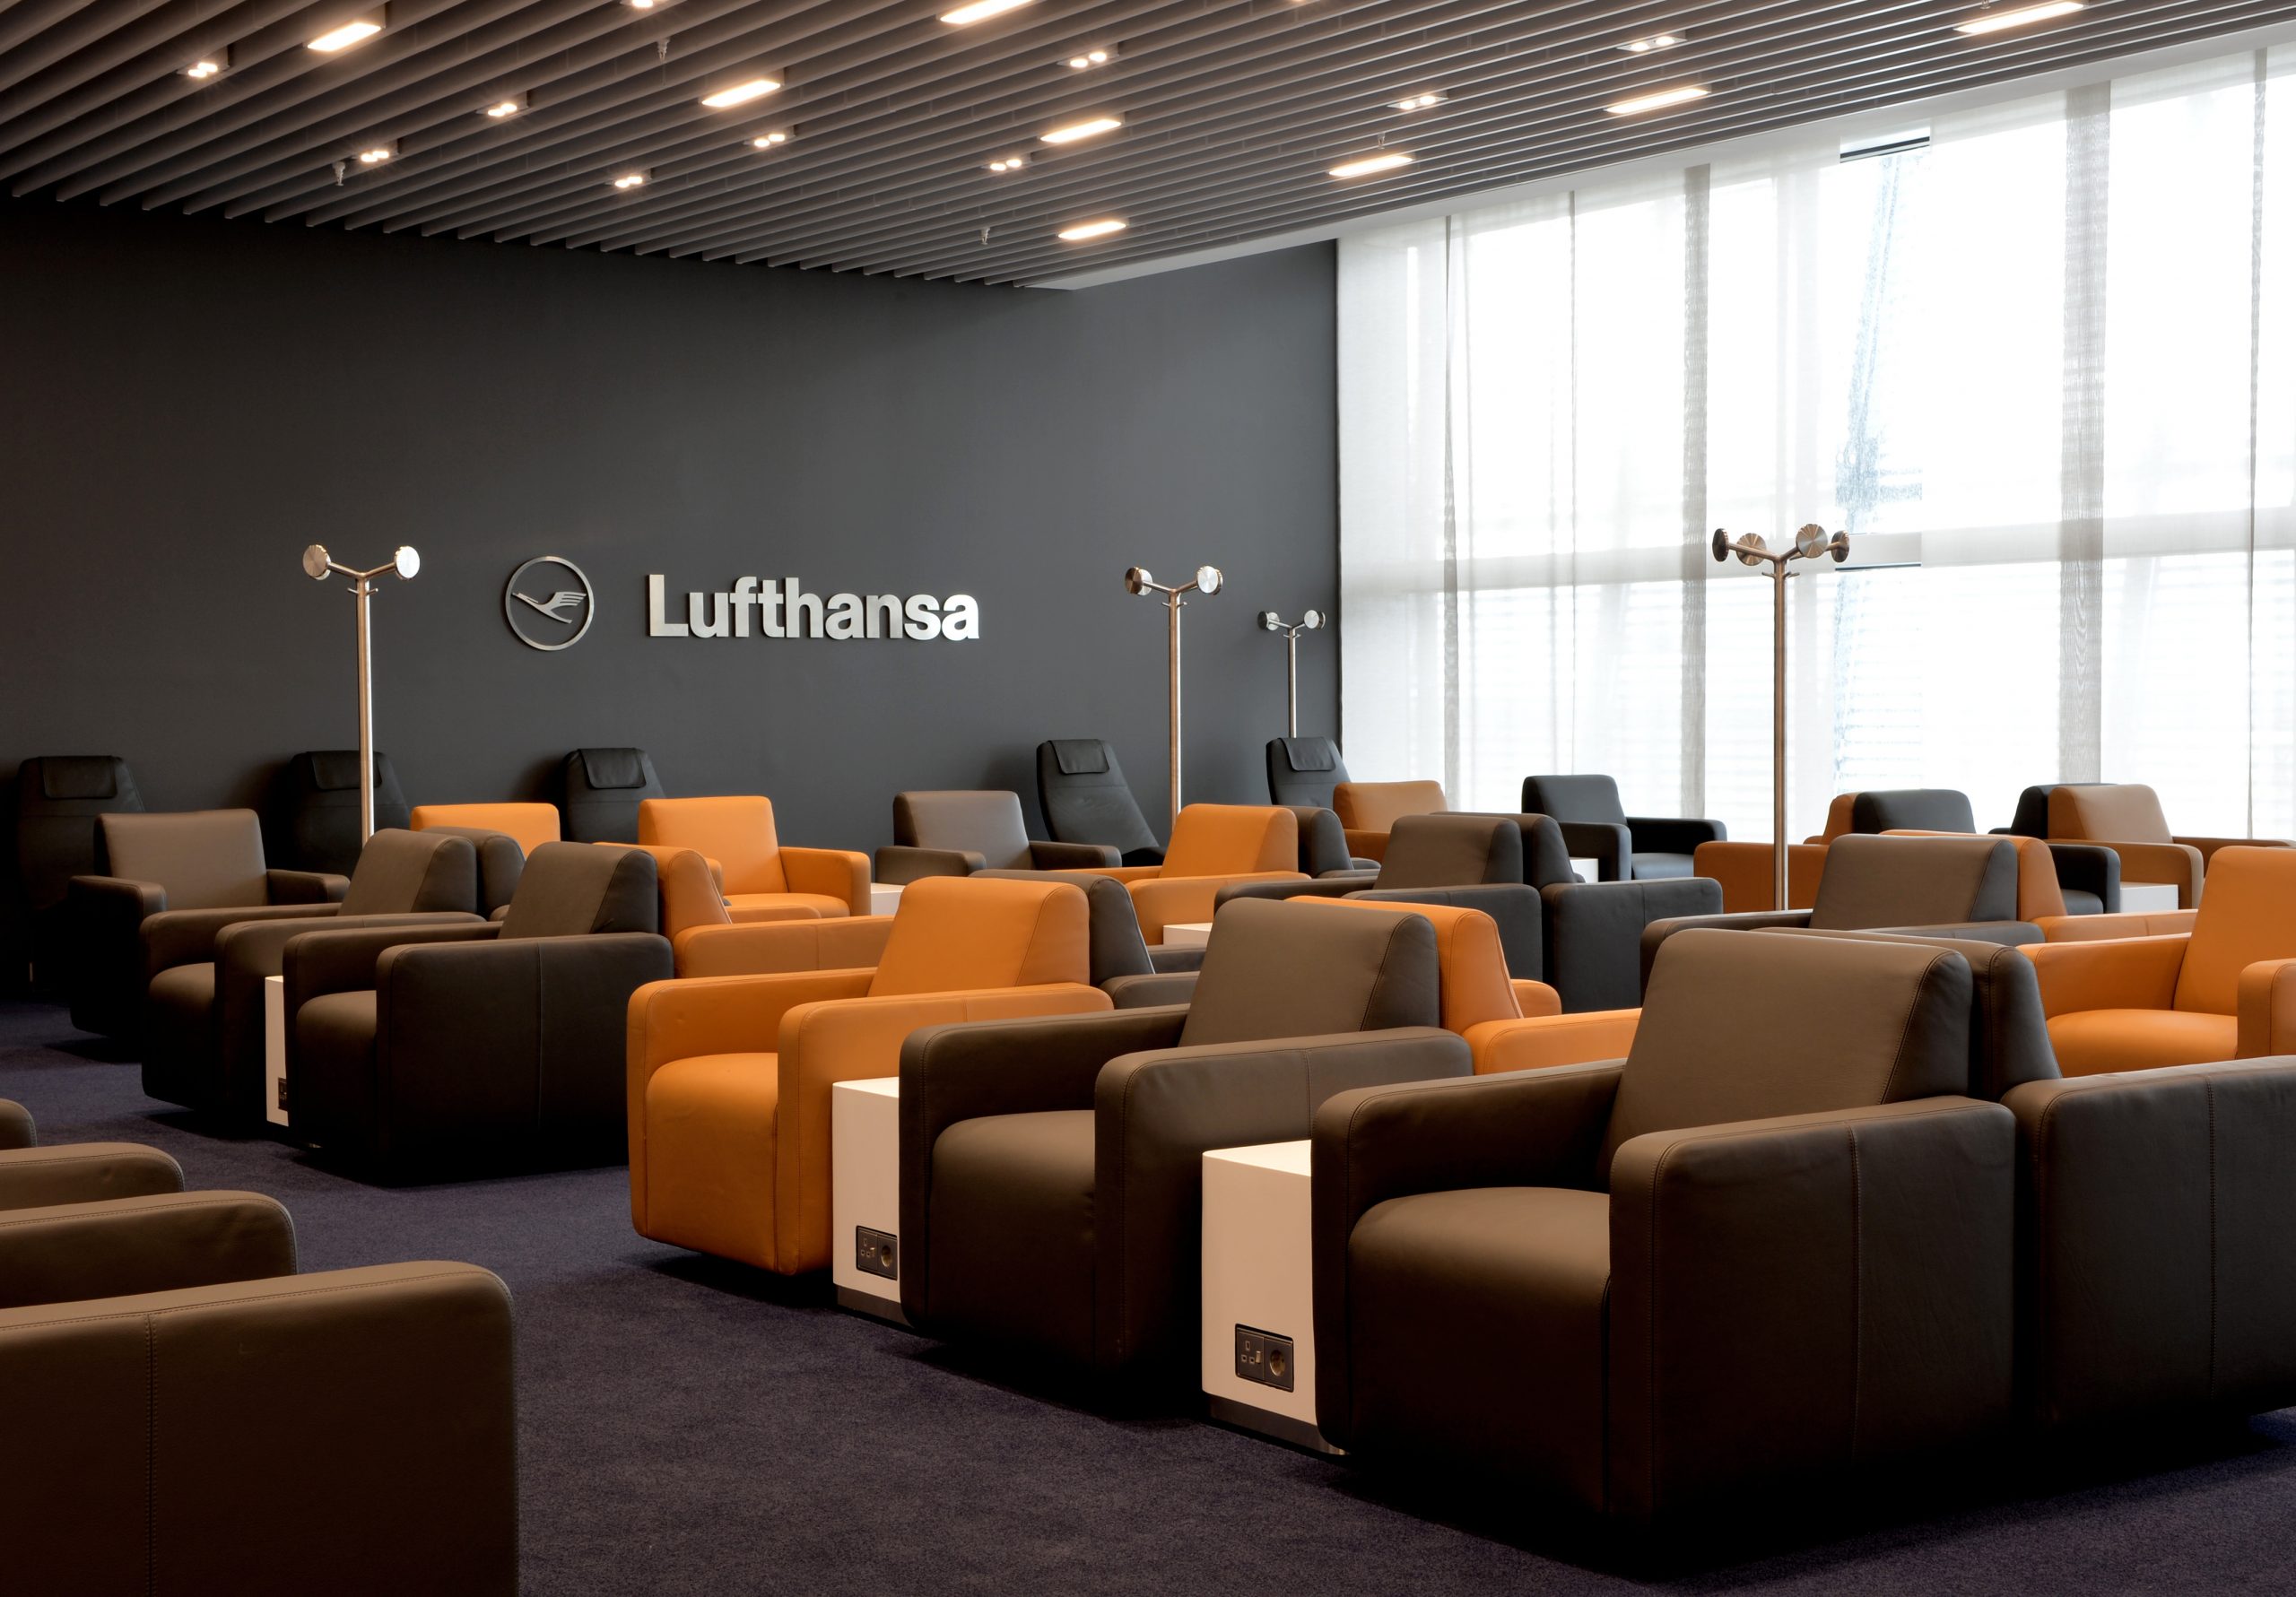 Lufthansa posts strong performance in a hard market